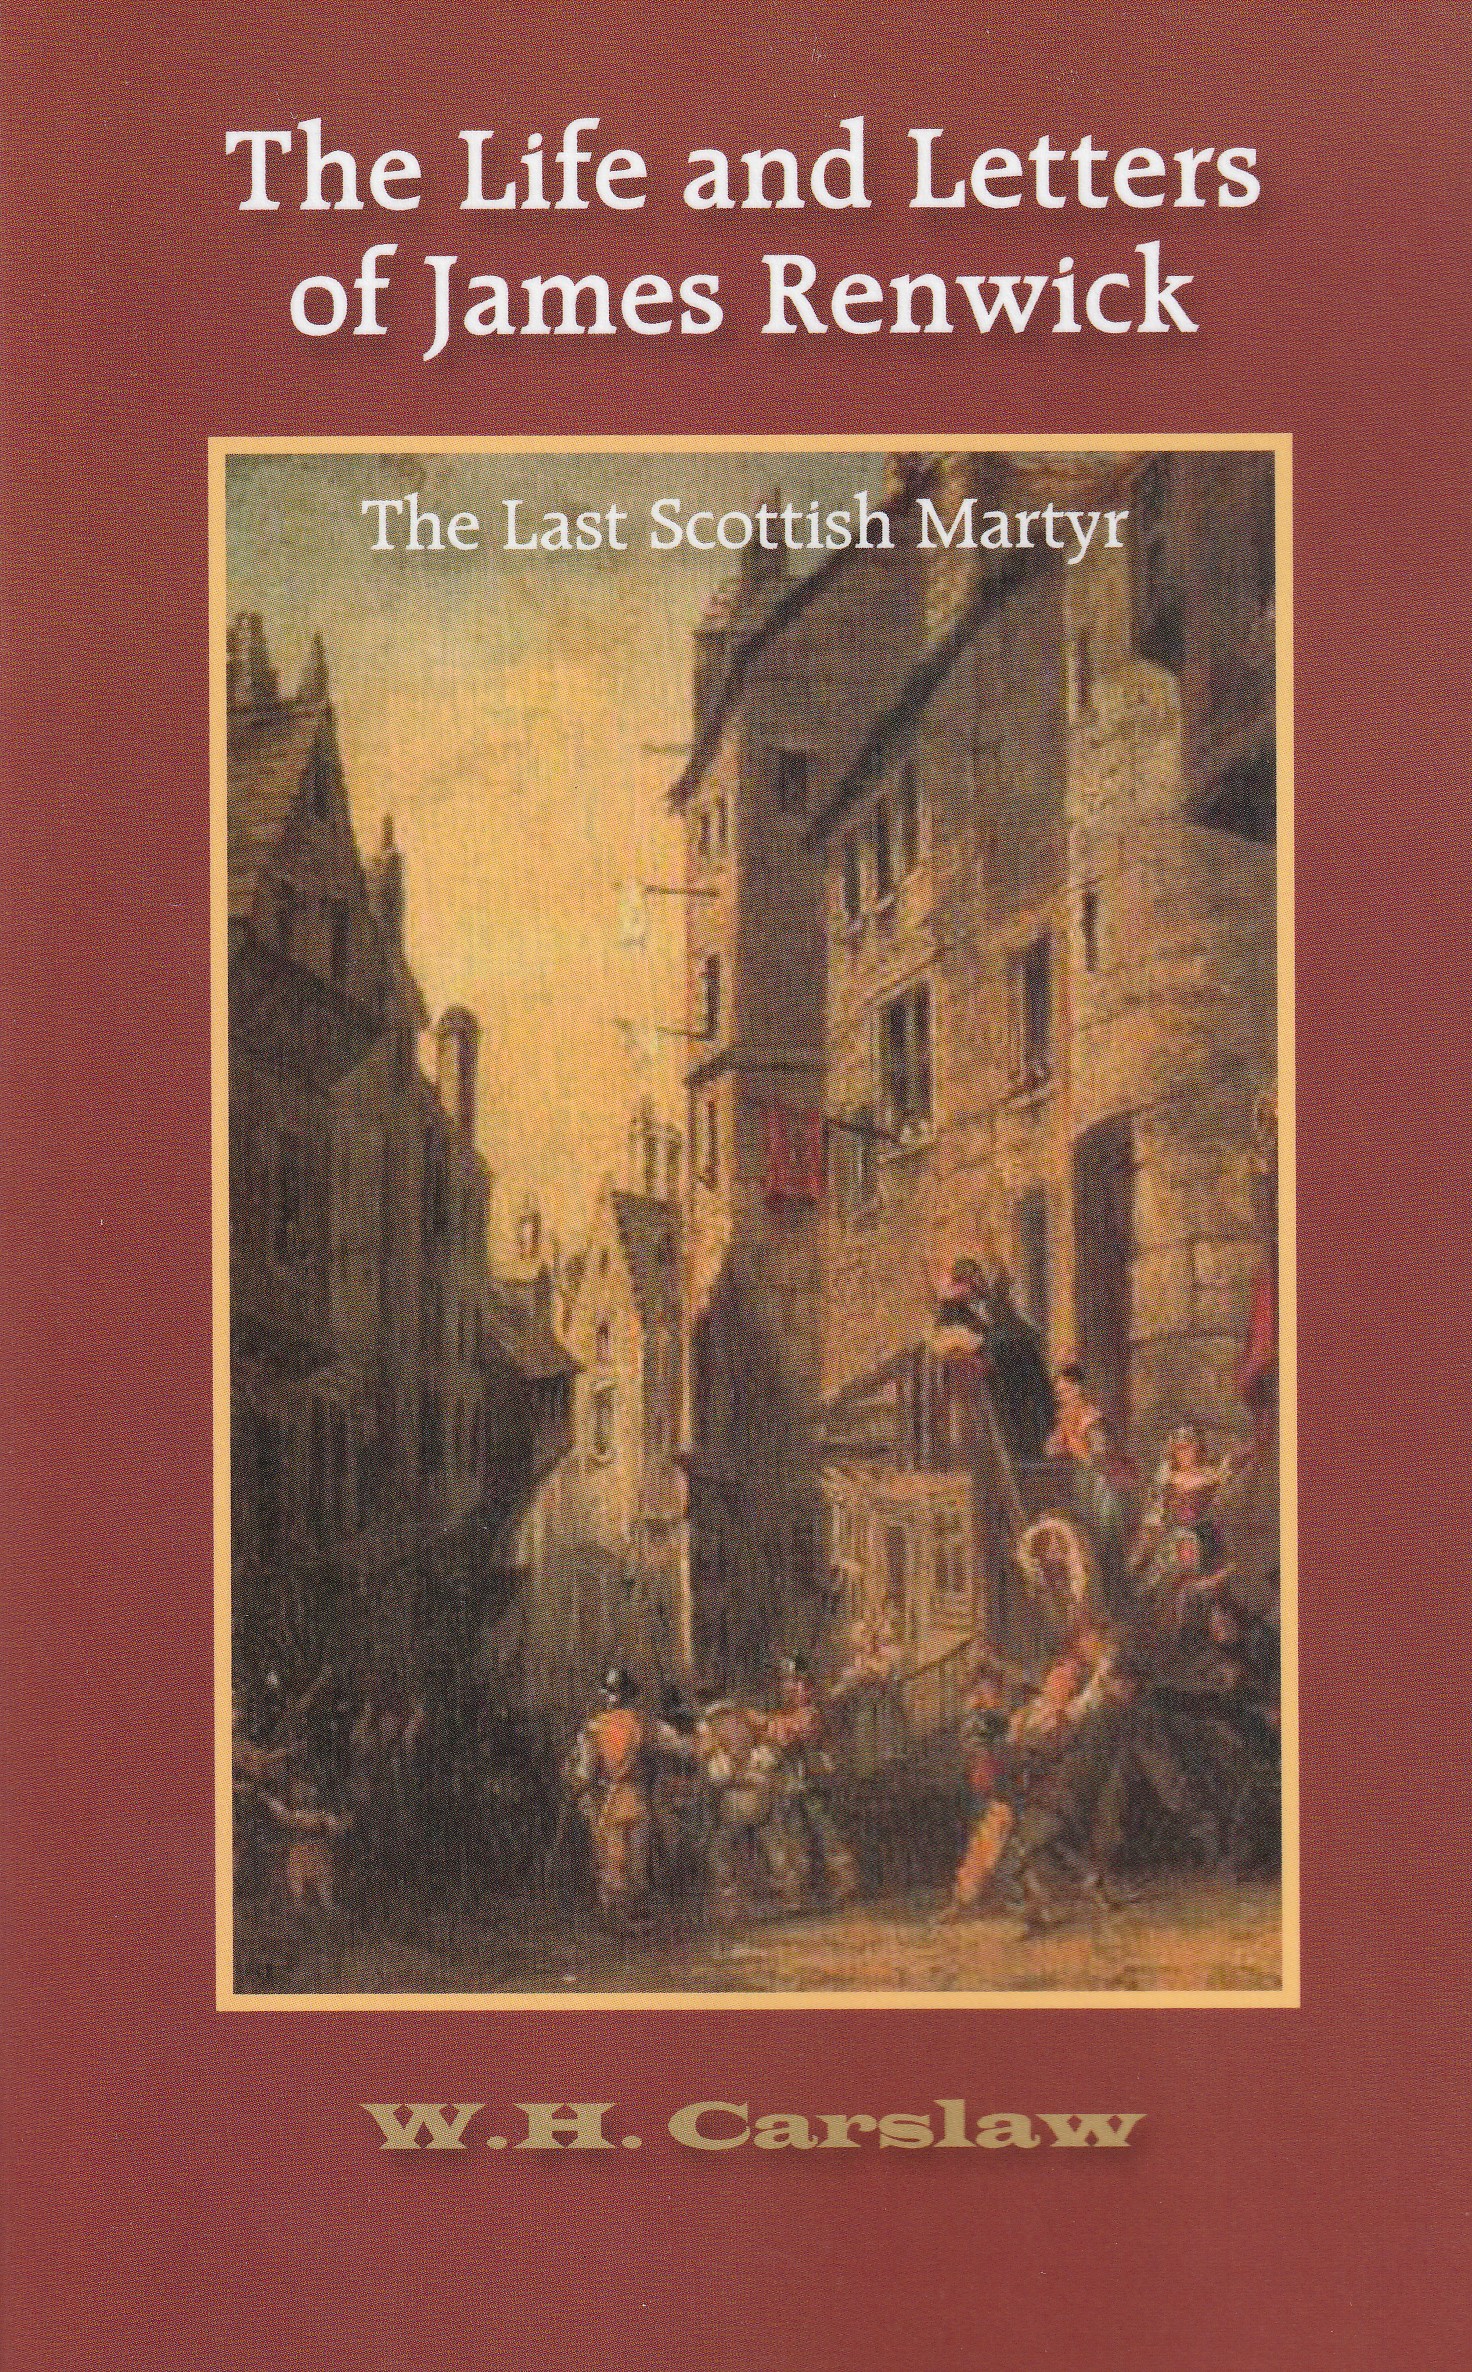 The Life and Letters of James Renwick: The Last Scottish Martyr